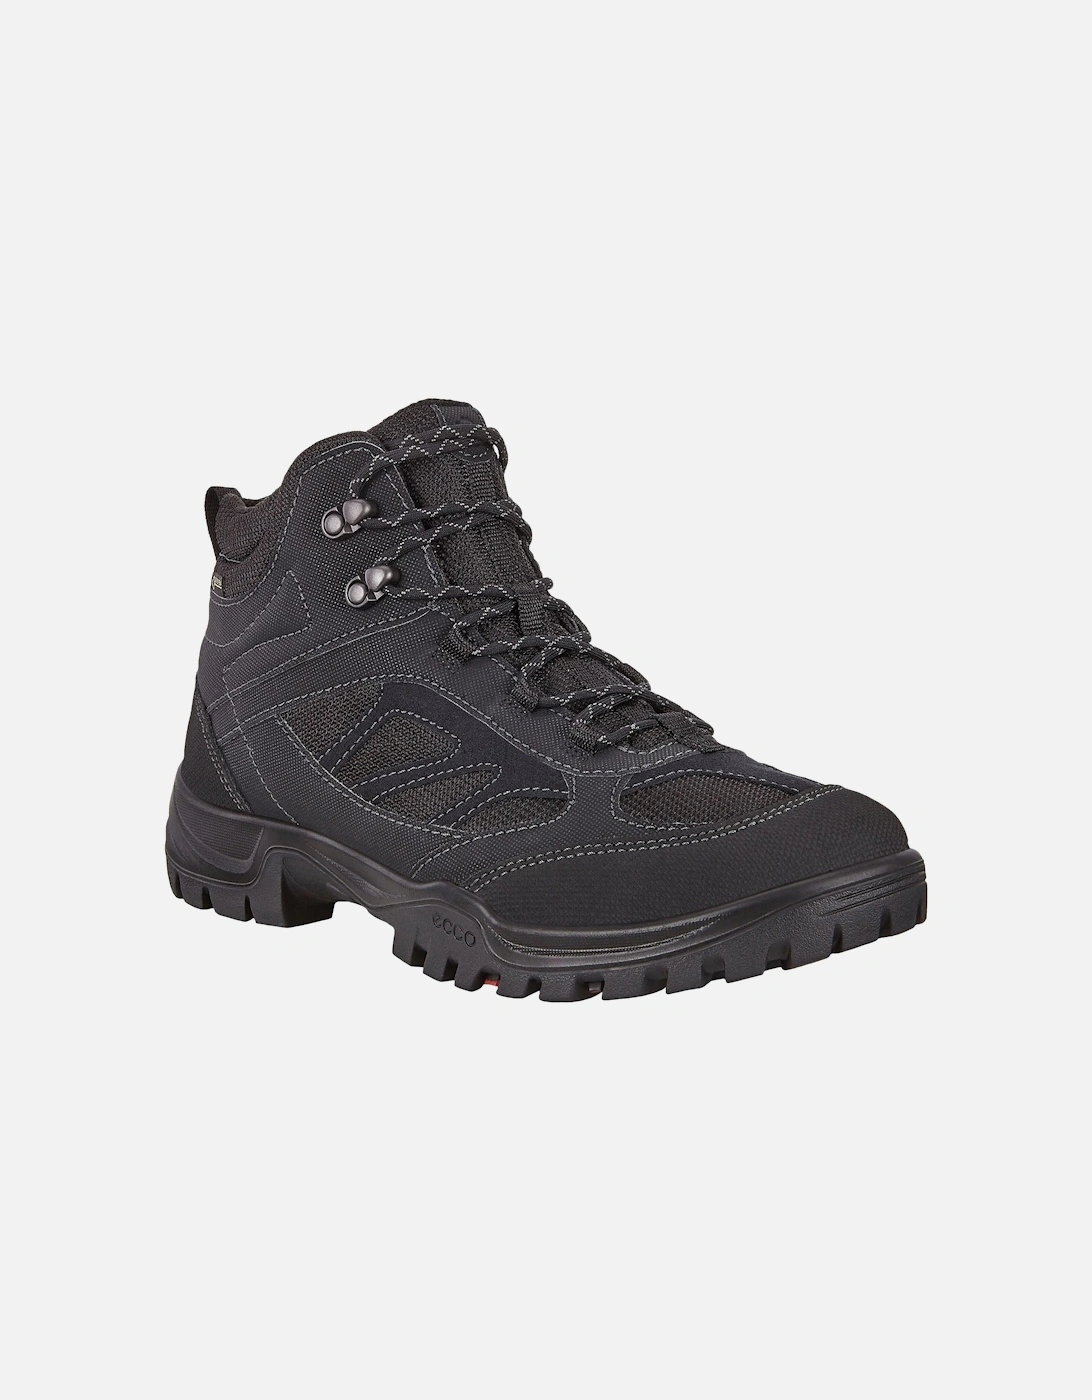 Mens XPEDITION III High GORE-TEX Waterproof Walking Boots - Black, 5 of 4